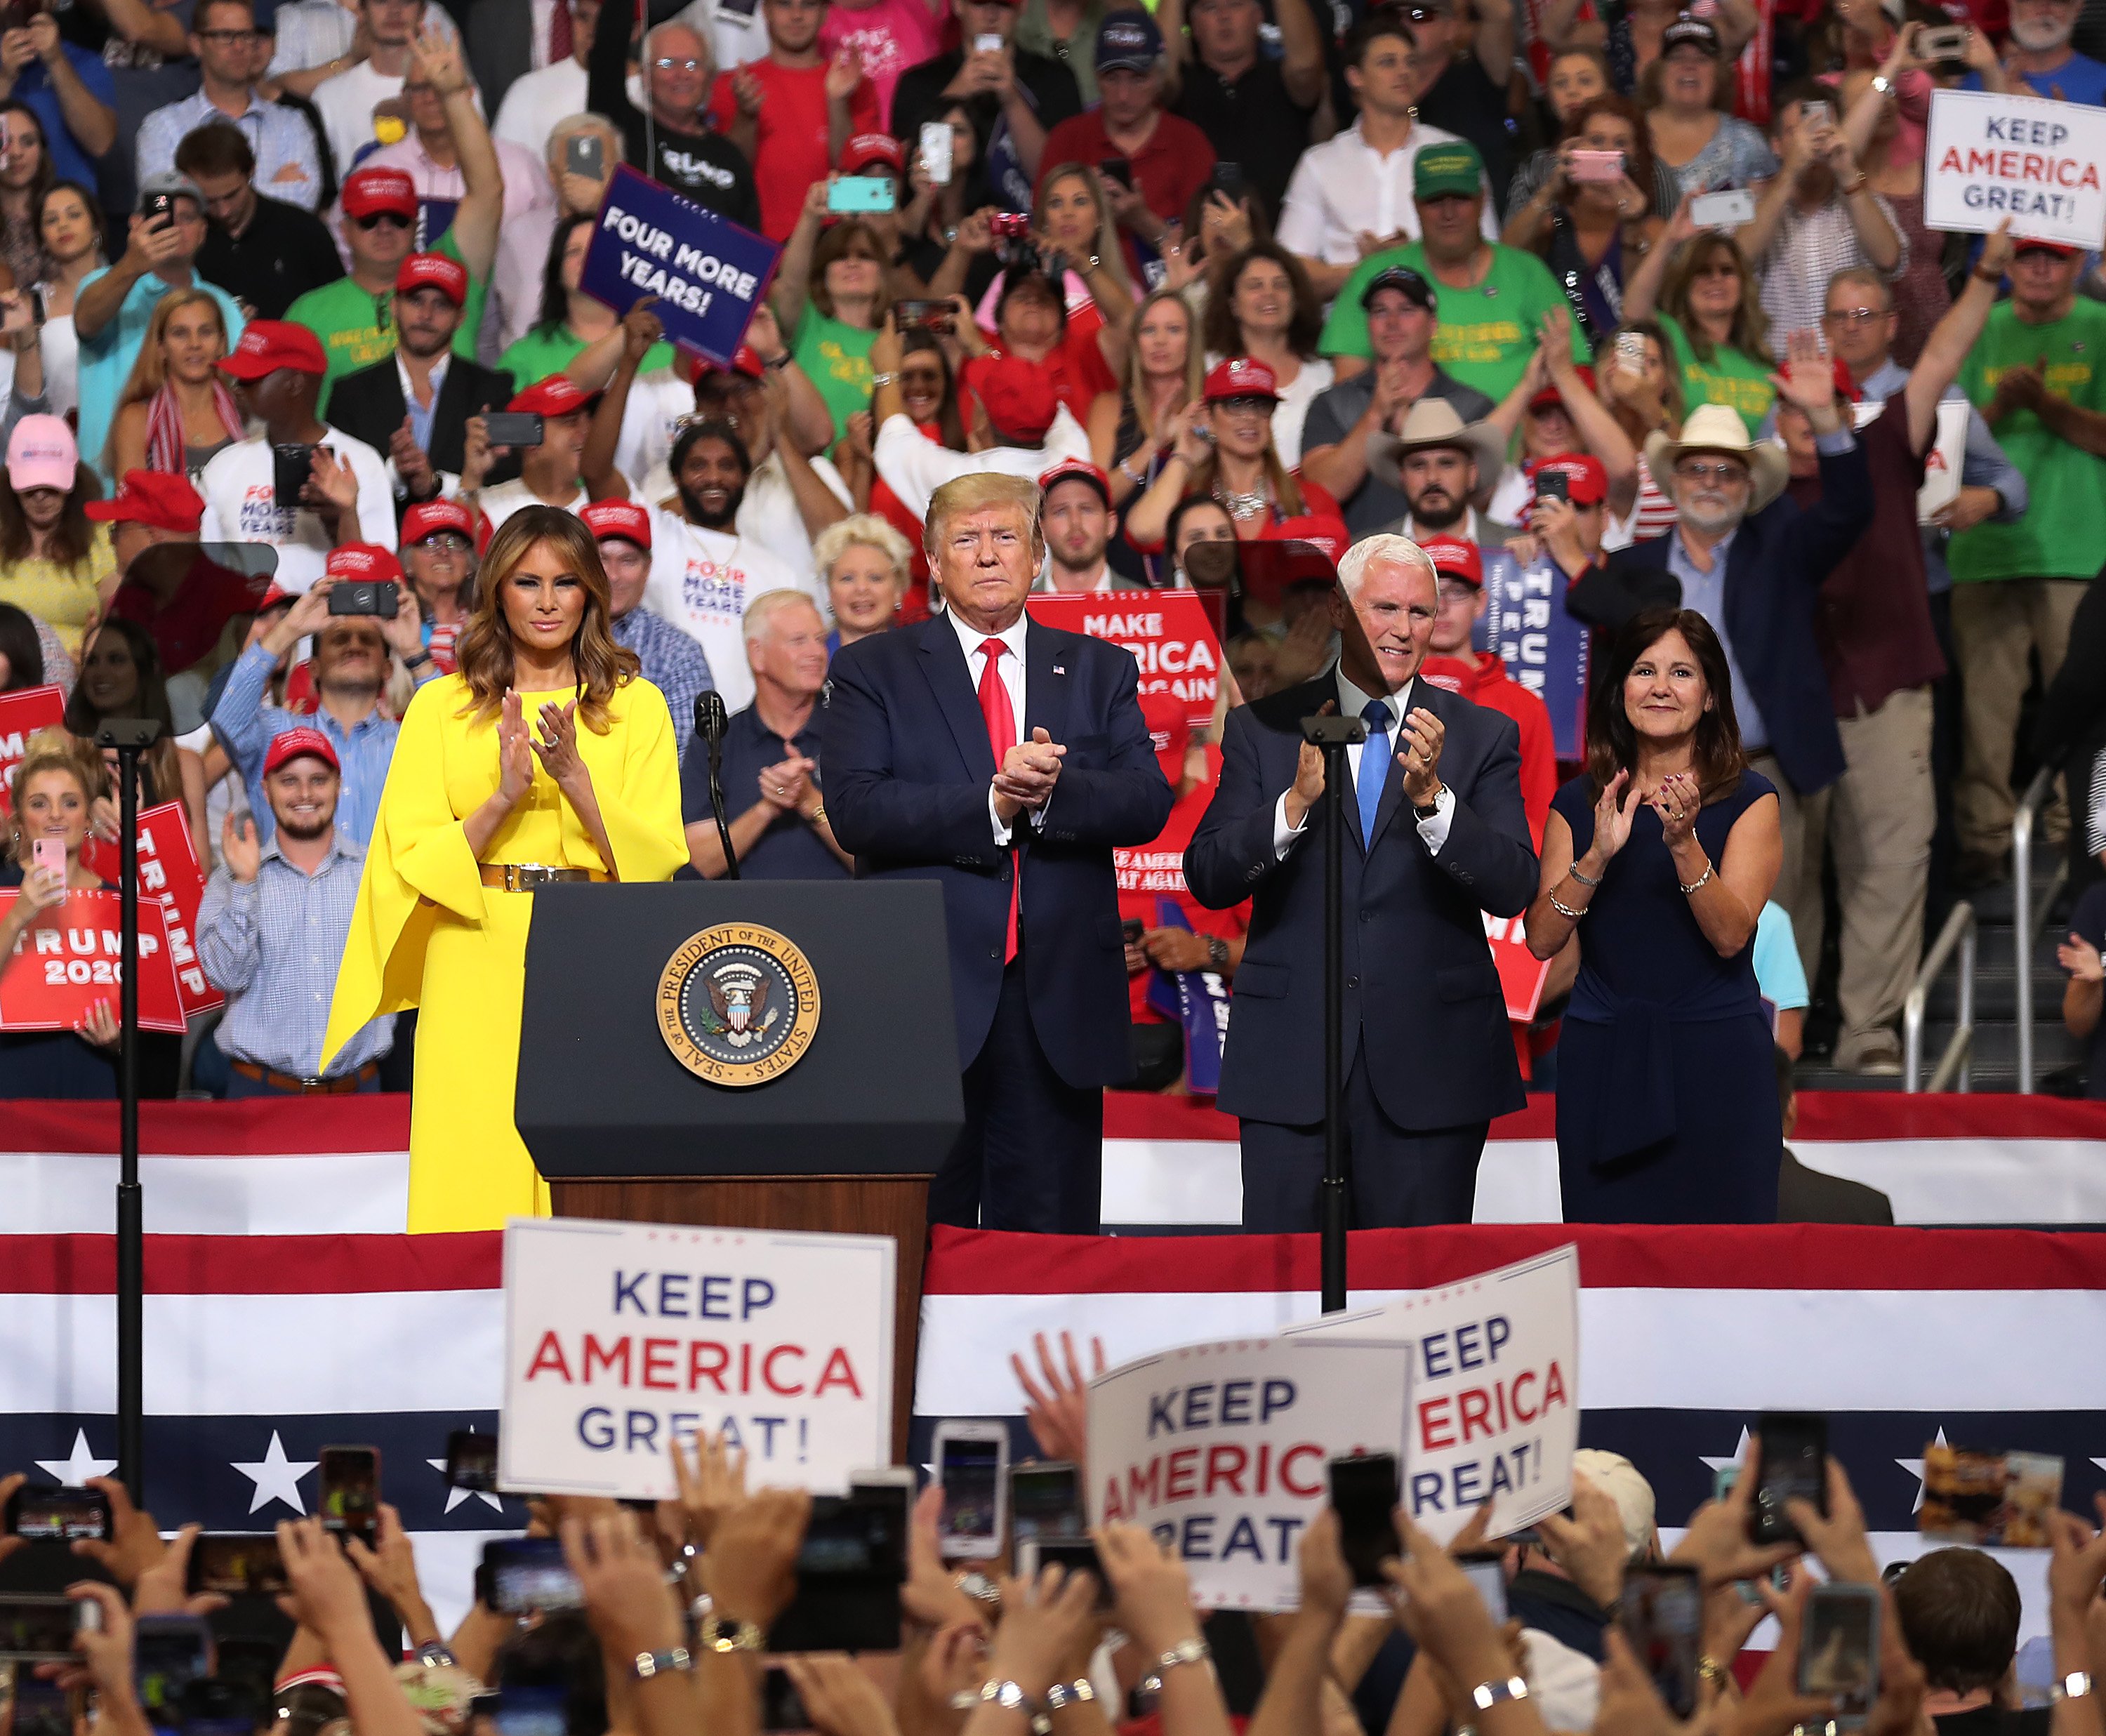 Donald Trump, Melania Trump, Mike Pence and his wife, Karen Pence, at the Amway Center in Orlando, Florida | Photo: Getty Images